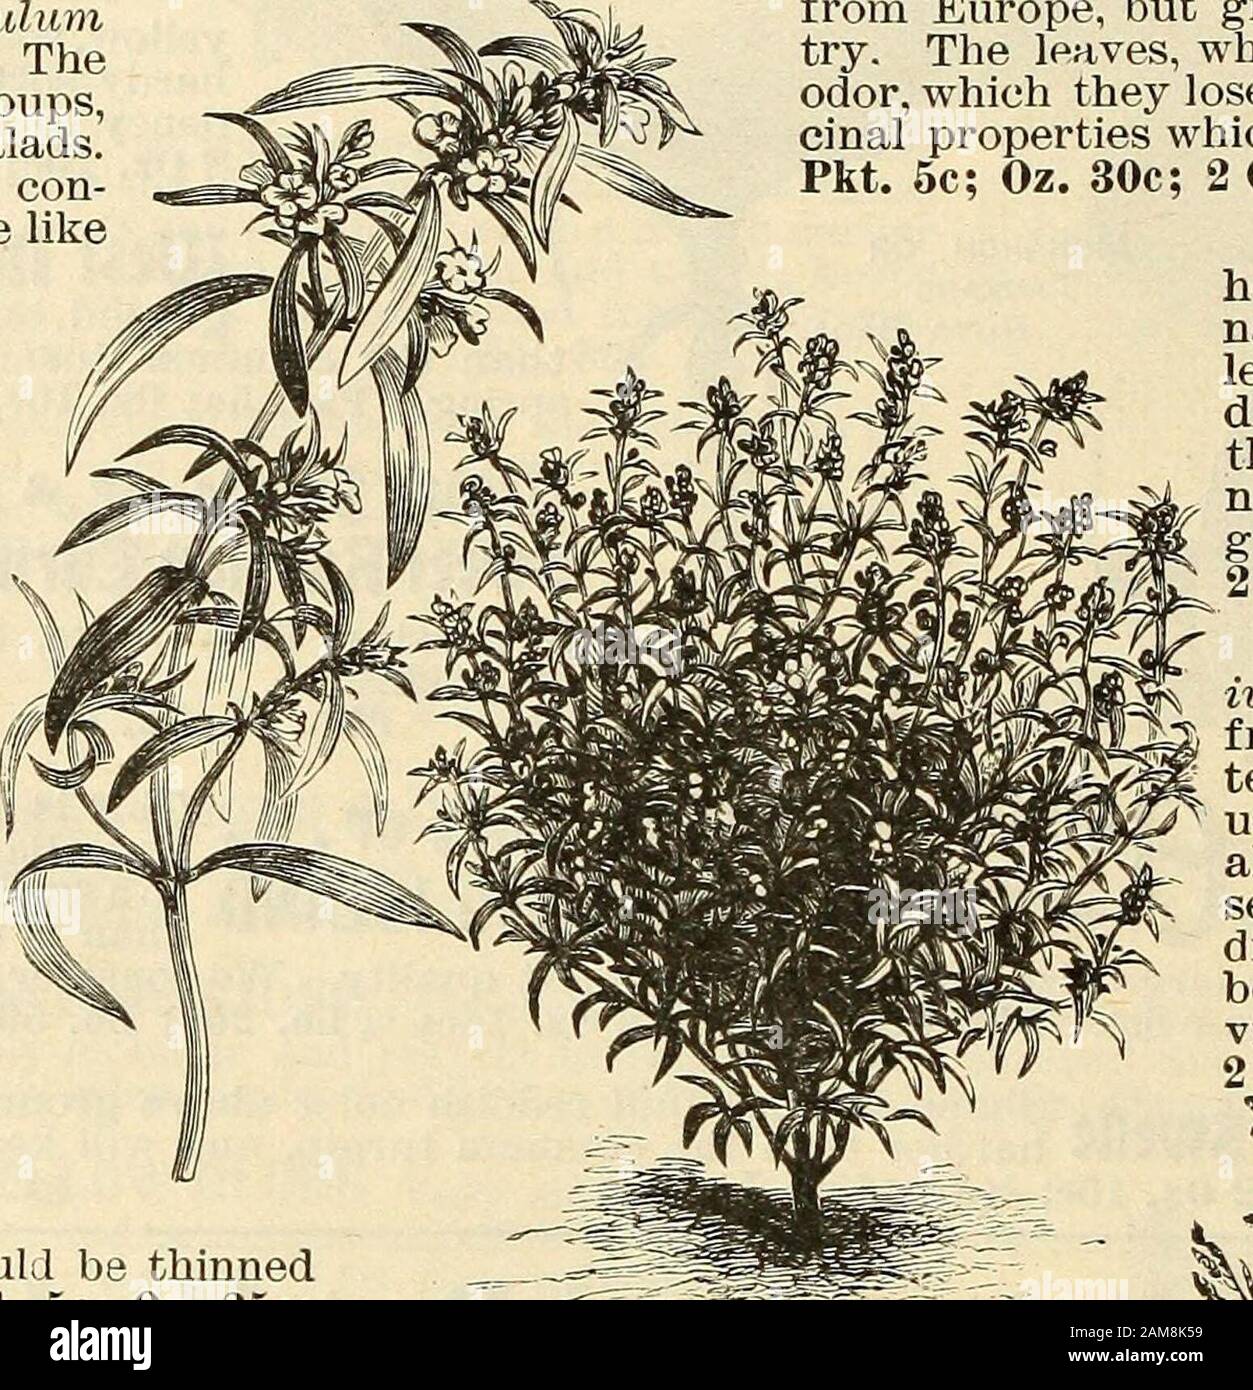 Seed annual, 1899 . 25 JViARJORAiVi, SWbbi [Origanum marjorana). A perennialplant, but not hardy enough to endure the winter of the North.The young, tender tops are used green for flavoring, or they maybe dried for winter use. Sow in drills as early as possible, and thinout the plants to ten inches apart. Pkt. 5c; Oz. 15c; 2 Oz. 25c; % Lb. 40c; Lb. $1.26 ROSEMARY (Rosmarinus officinalis). A hardy perennial withfragrant odor, and a warm, aromatic, bitter taste. May be easilyraised from seed, but does not reach a size fit for use until thesecond season. The dried leaves deteriorate rapidly with Stock Photo